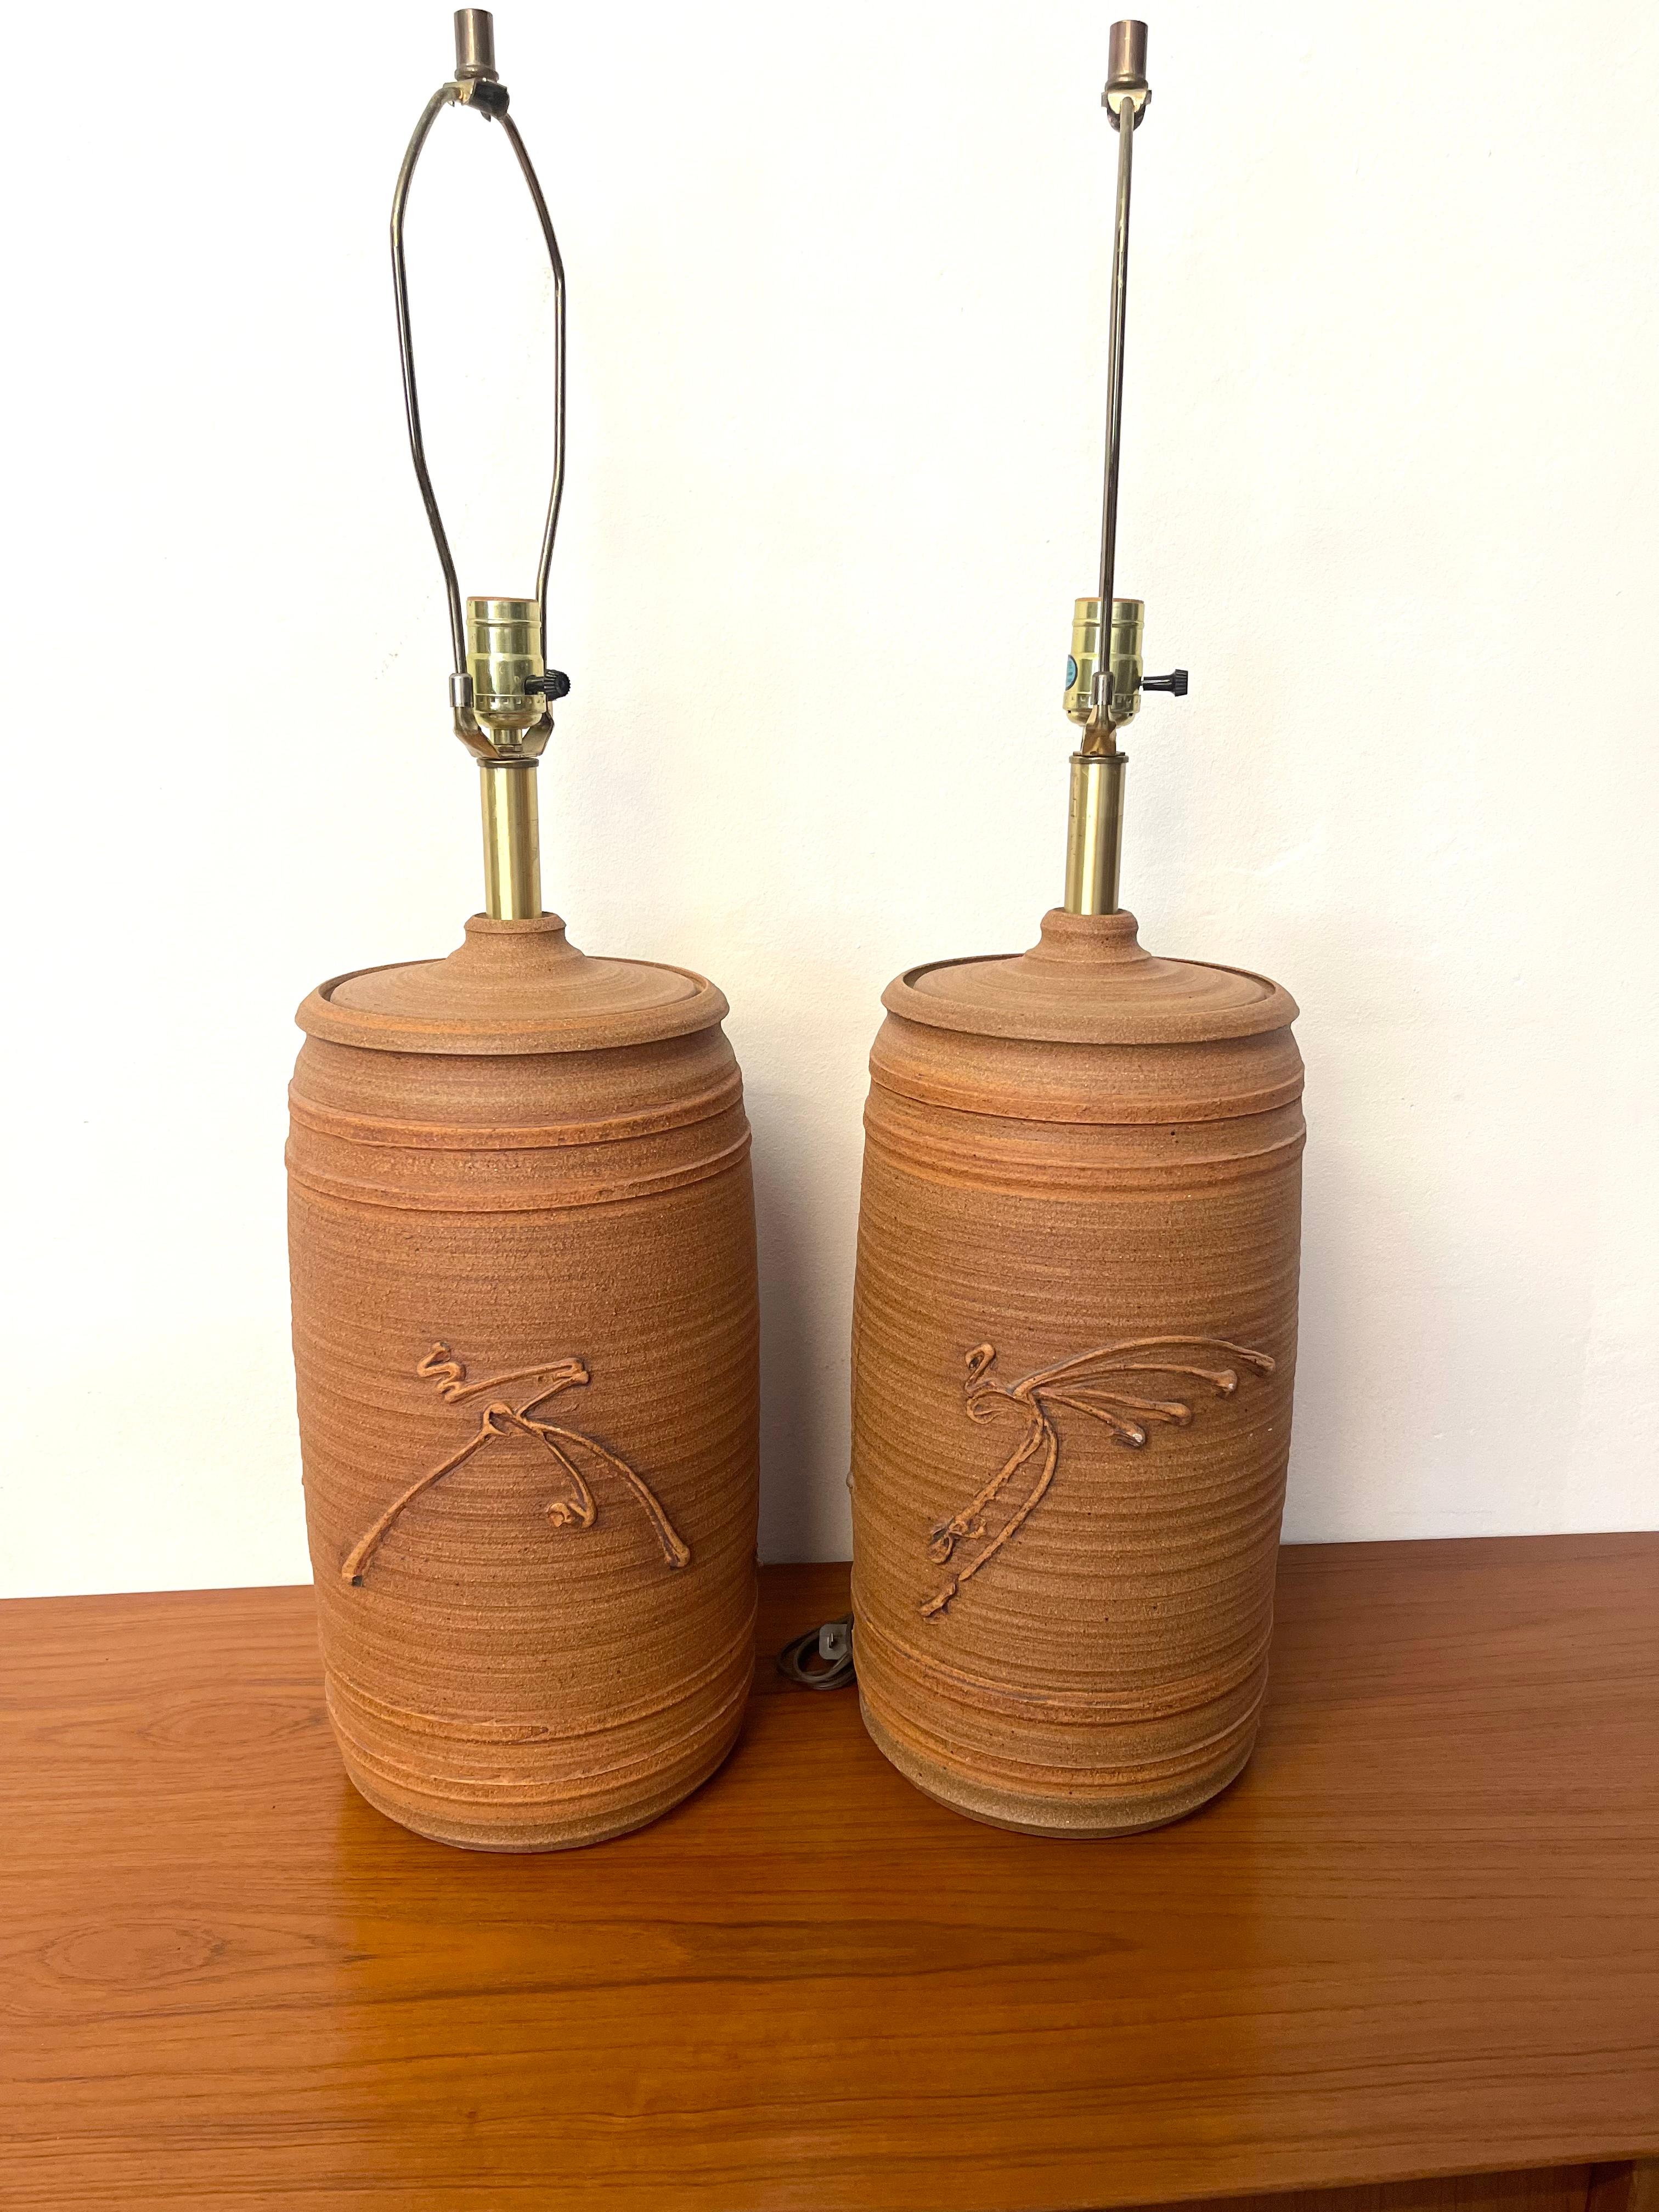 Amazing pair of mid-century brown ceramic table lamps by Bob Kinzie. They are original from the 1960s. They are in excellent condition. No broken or damages. The light works great and there are no shade lamps. Great room accent pieces.